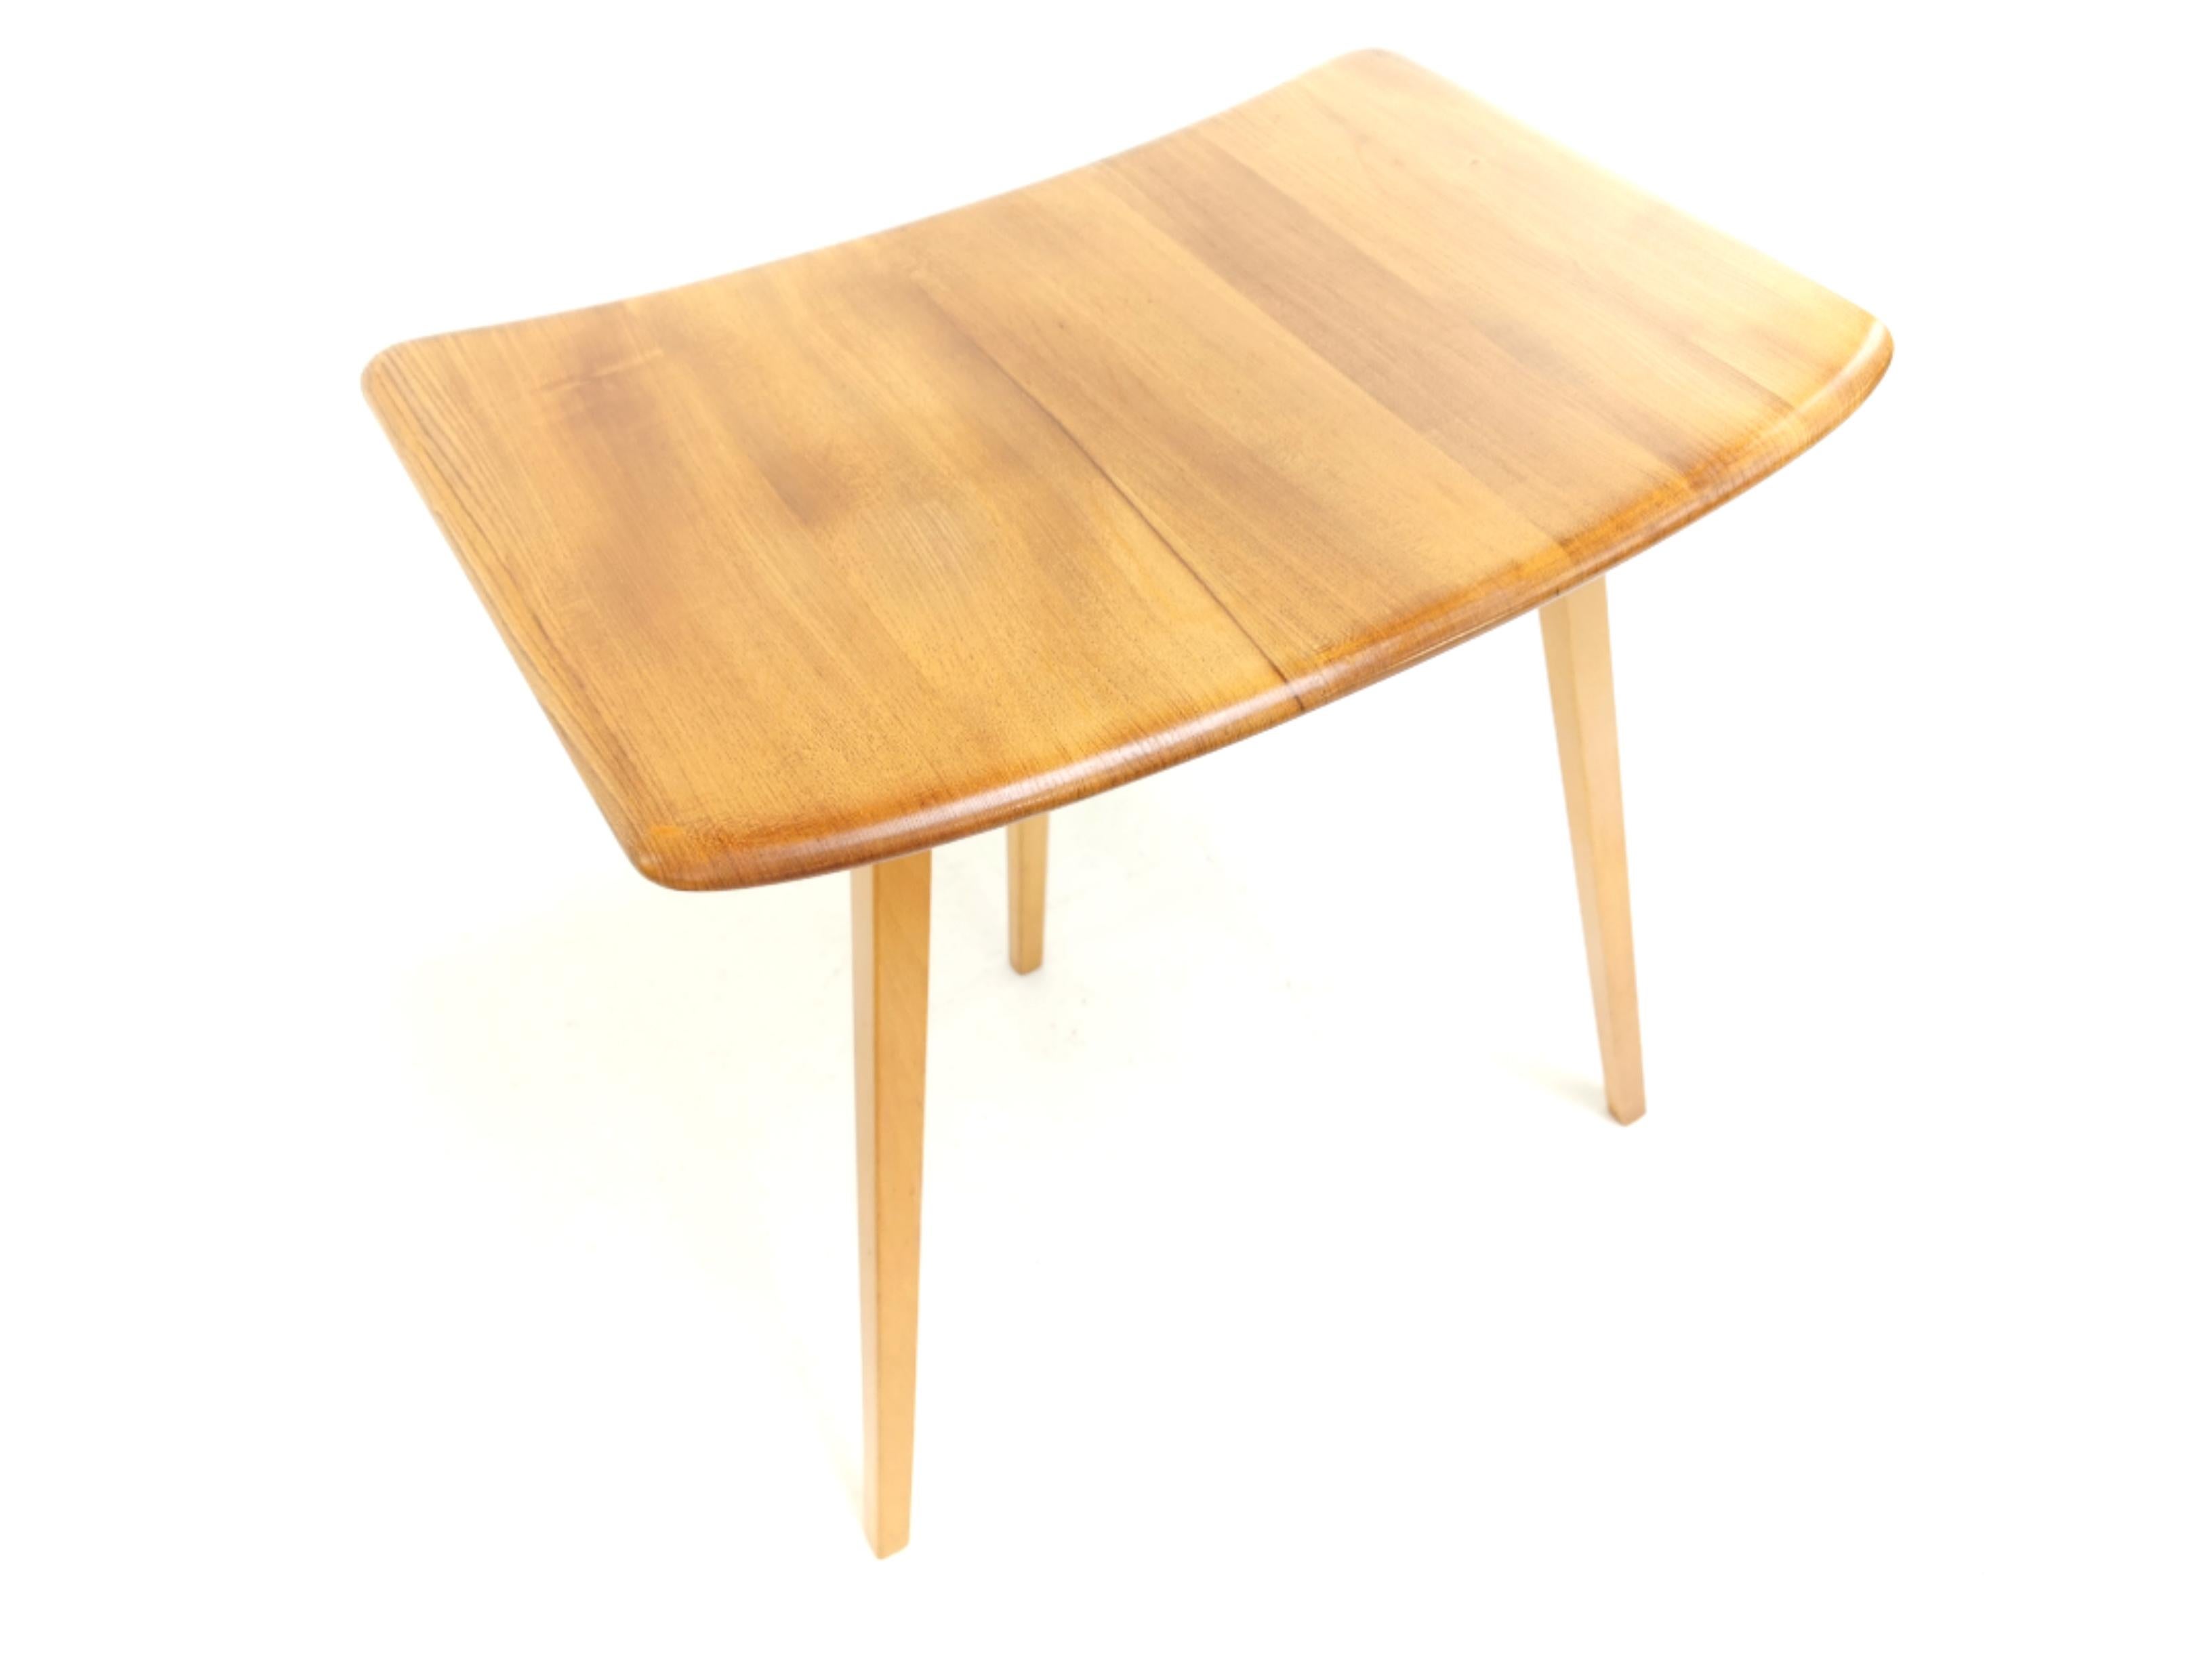 British Ercol Plank Top Writing Desk Compact Occasional Table Midcentury